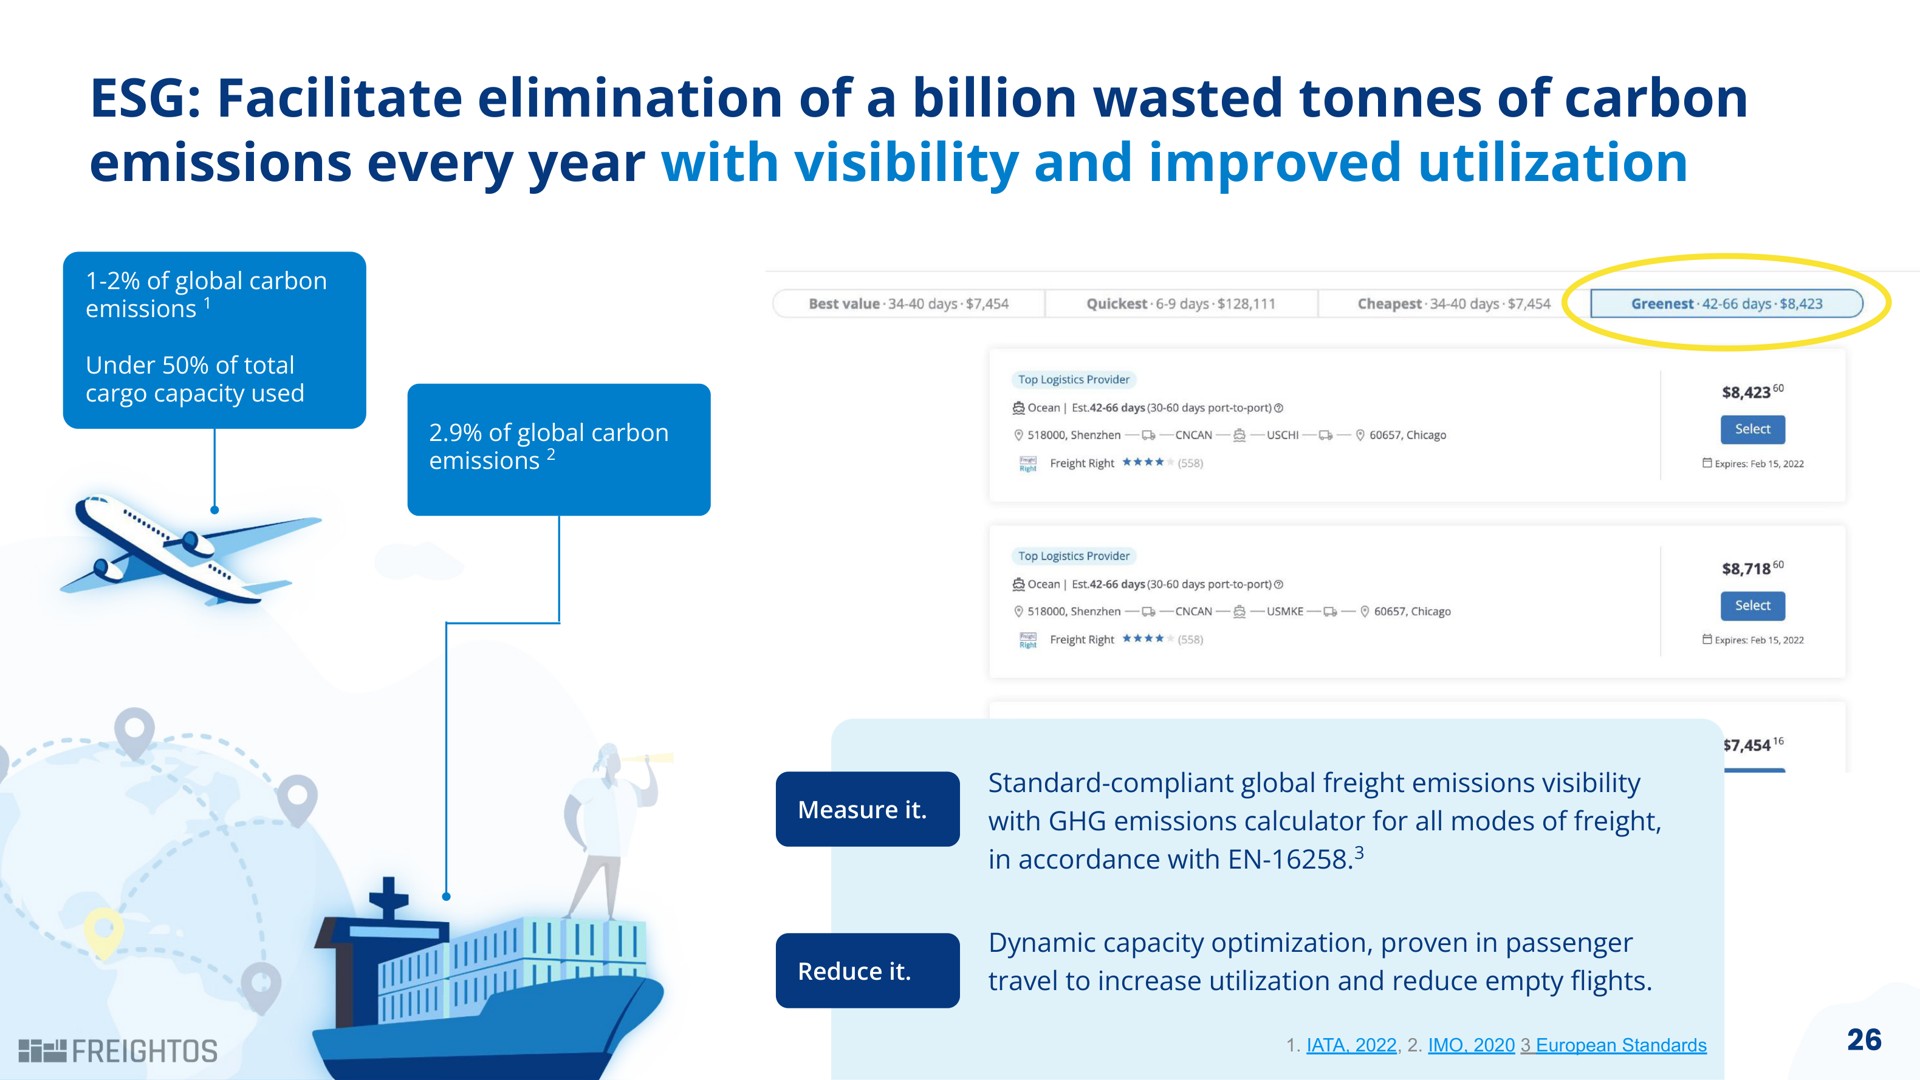 facilitate elimination of a billion wasted of carbon emissions every year with visibility and improved utilization | Freightos